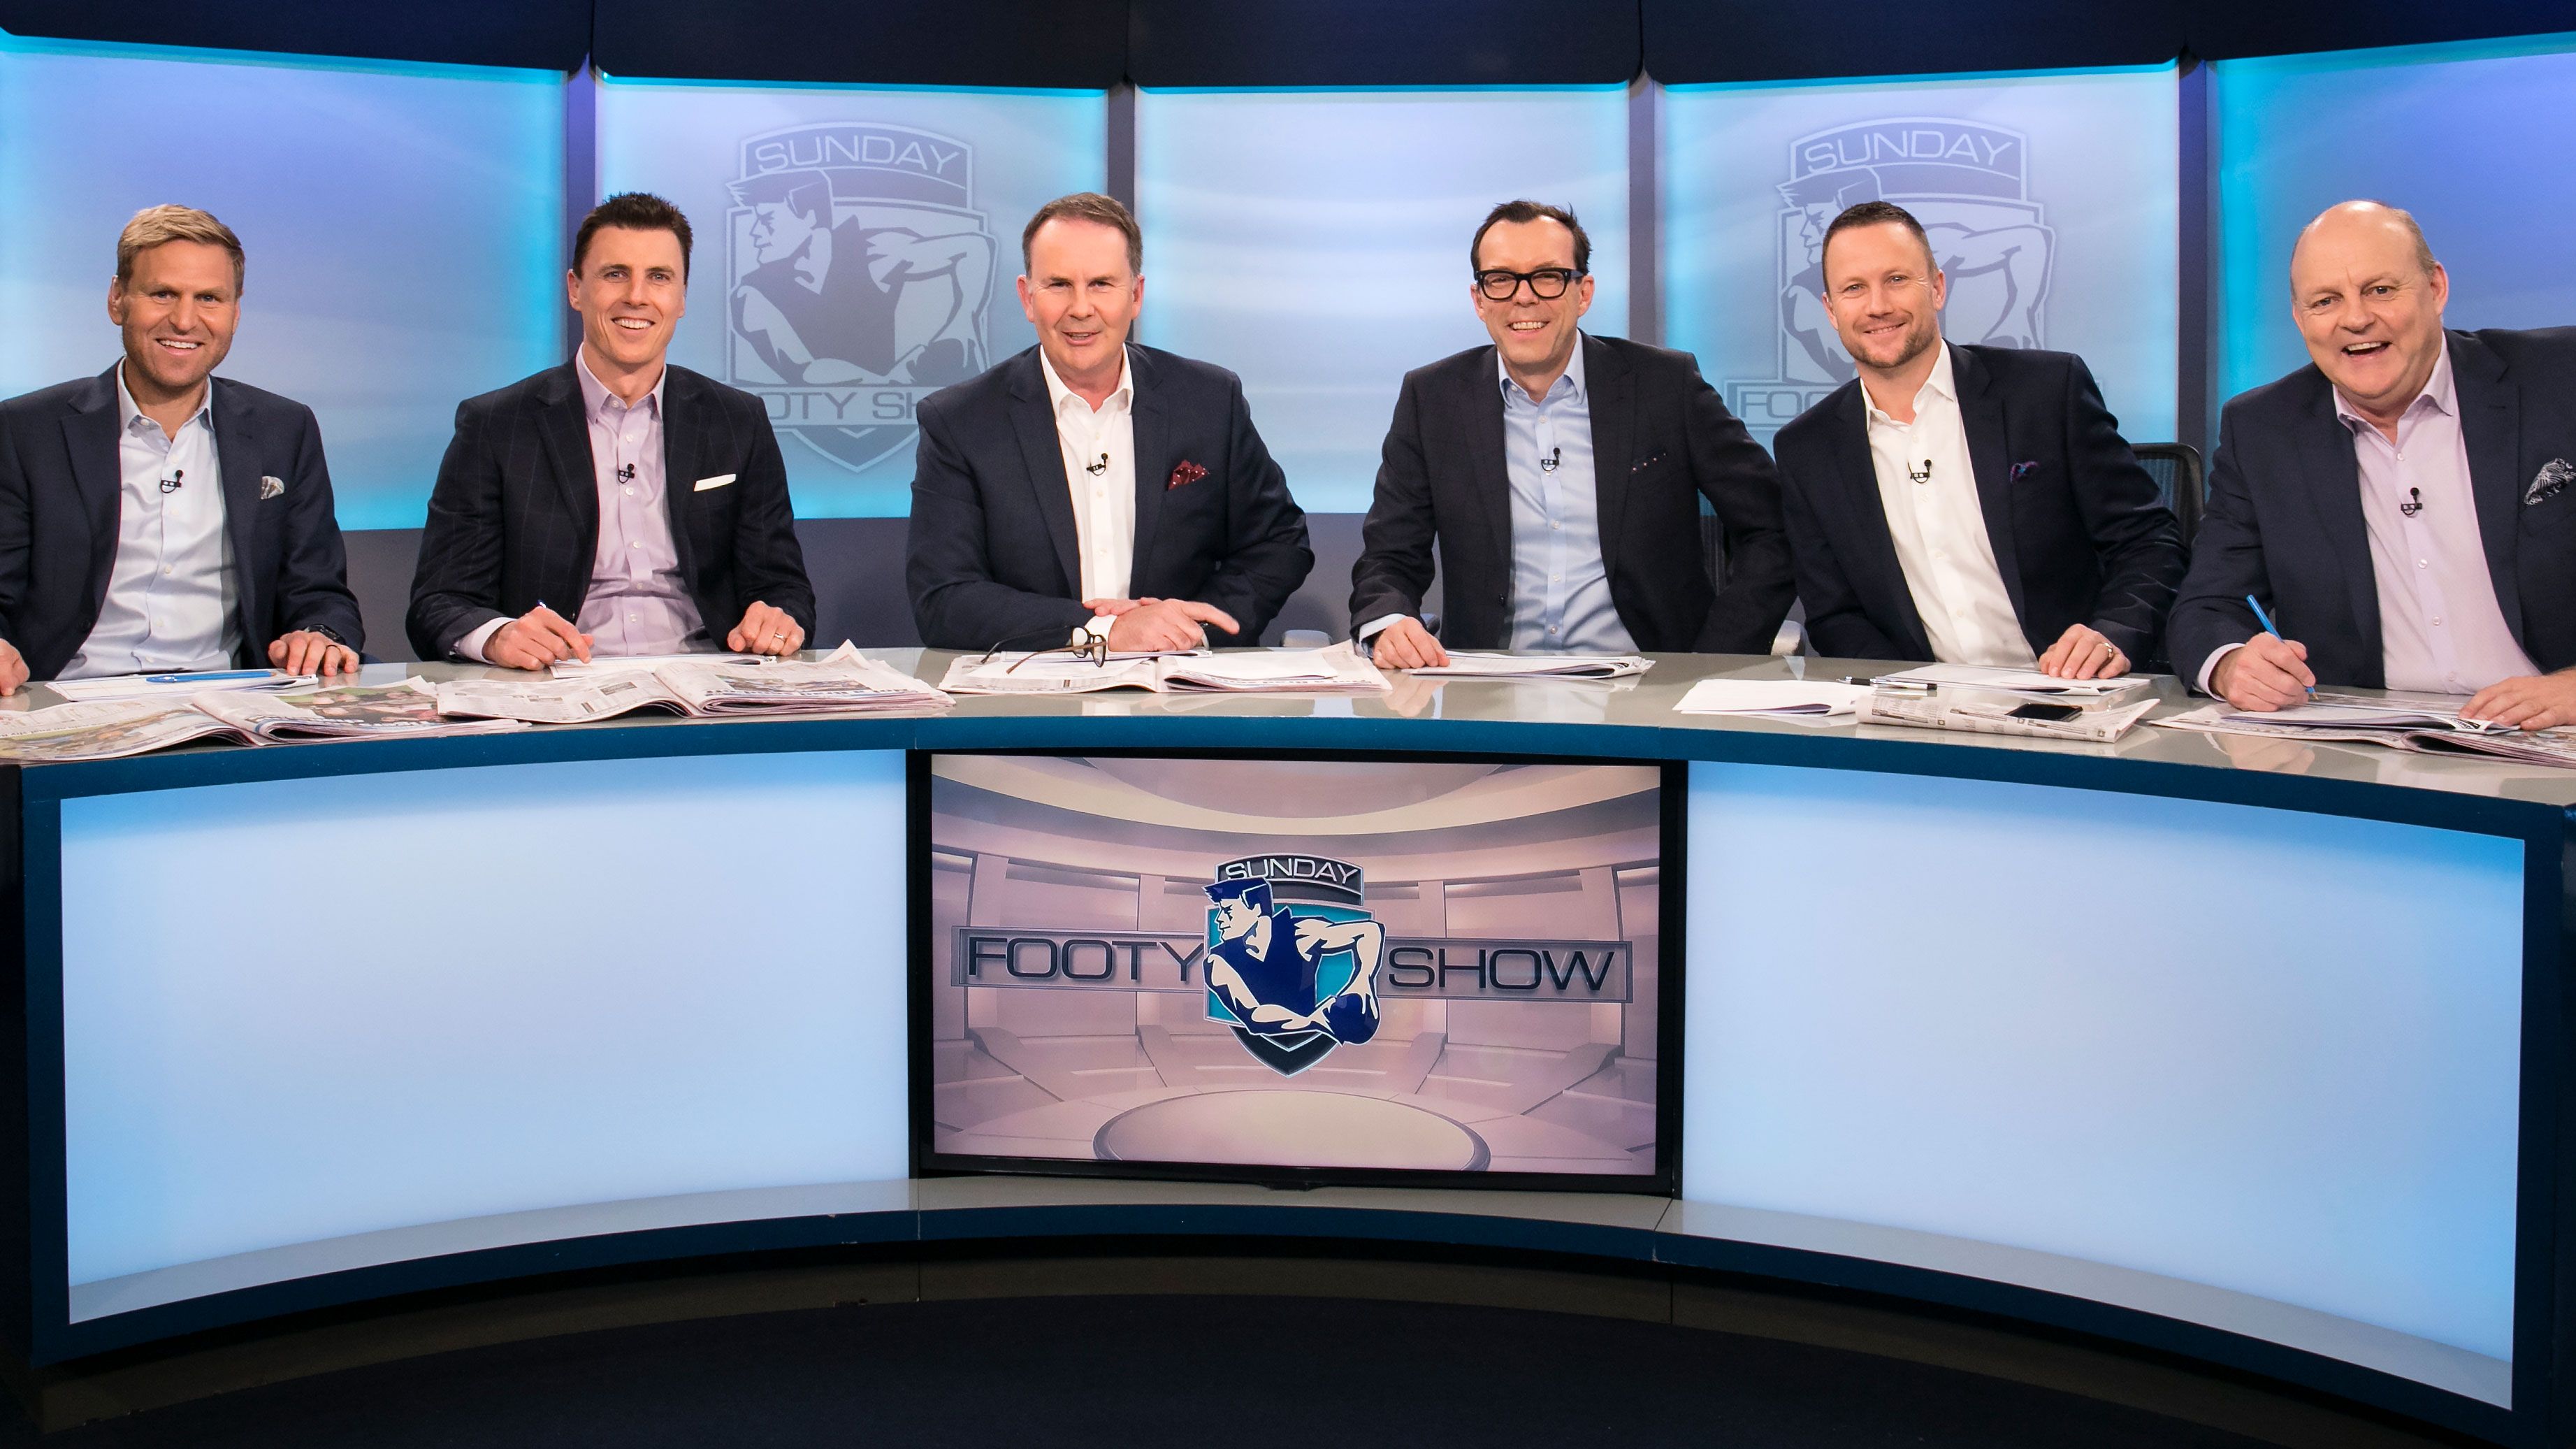 The Sunday Footy Show panel.